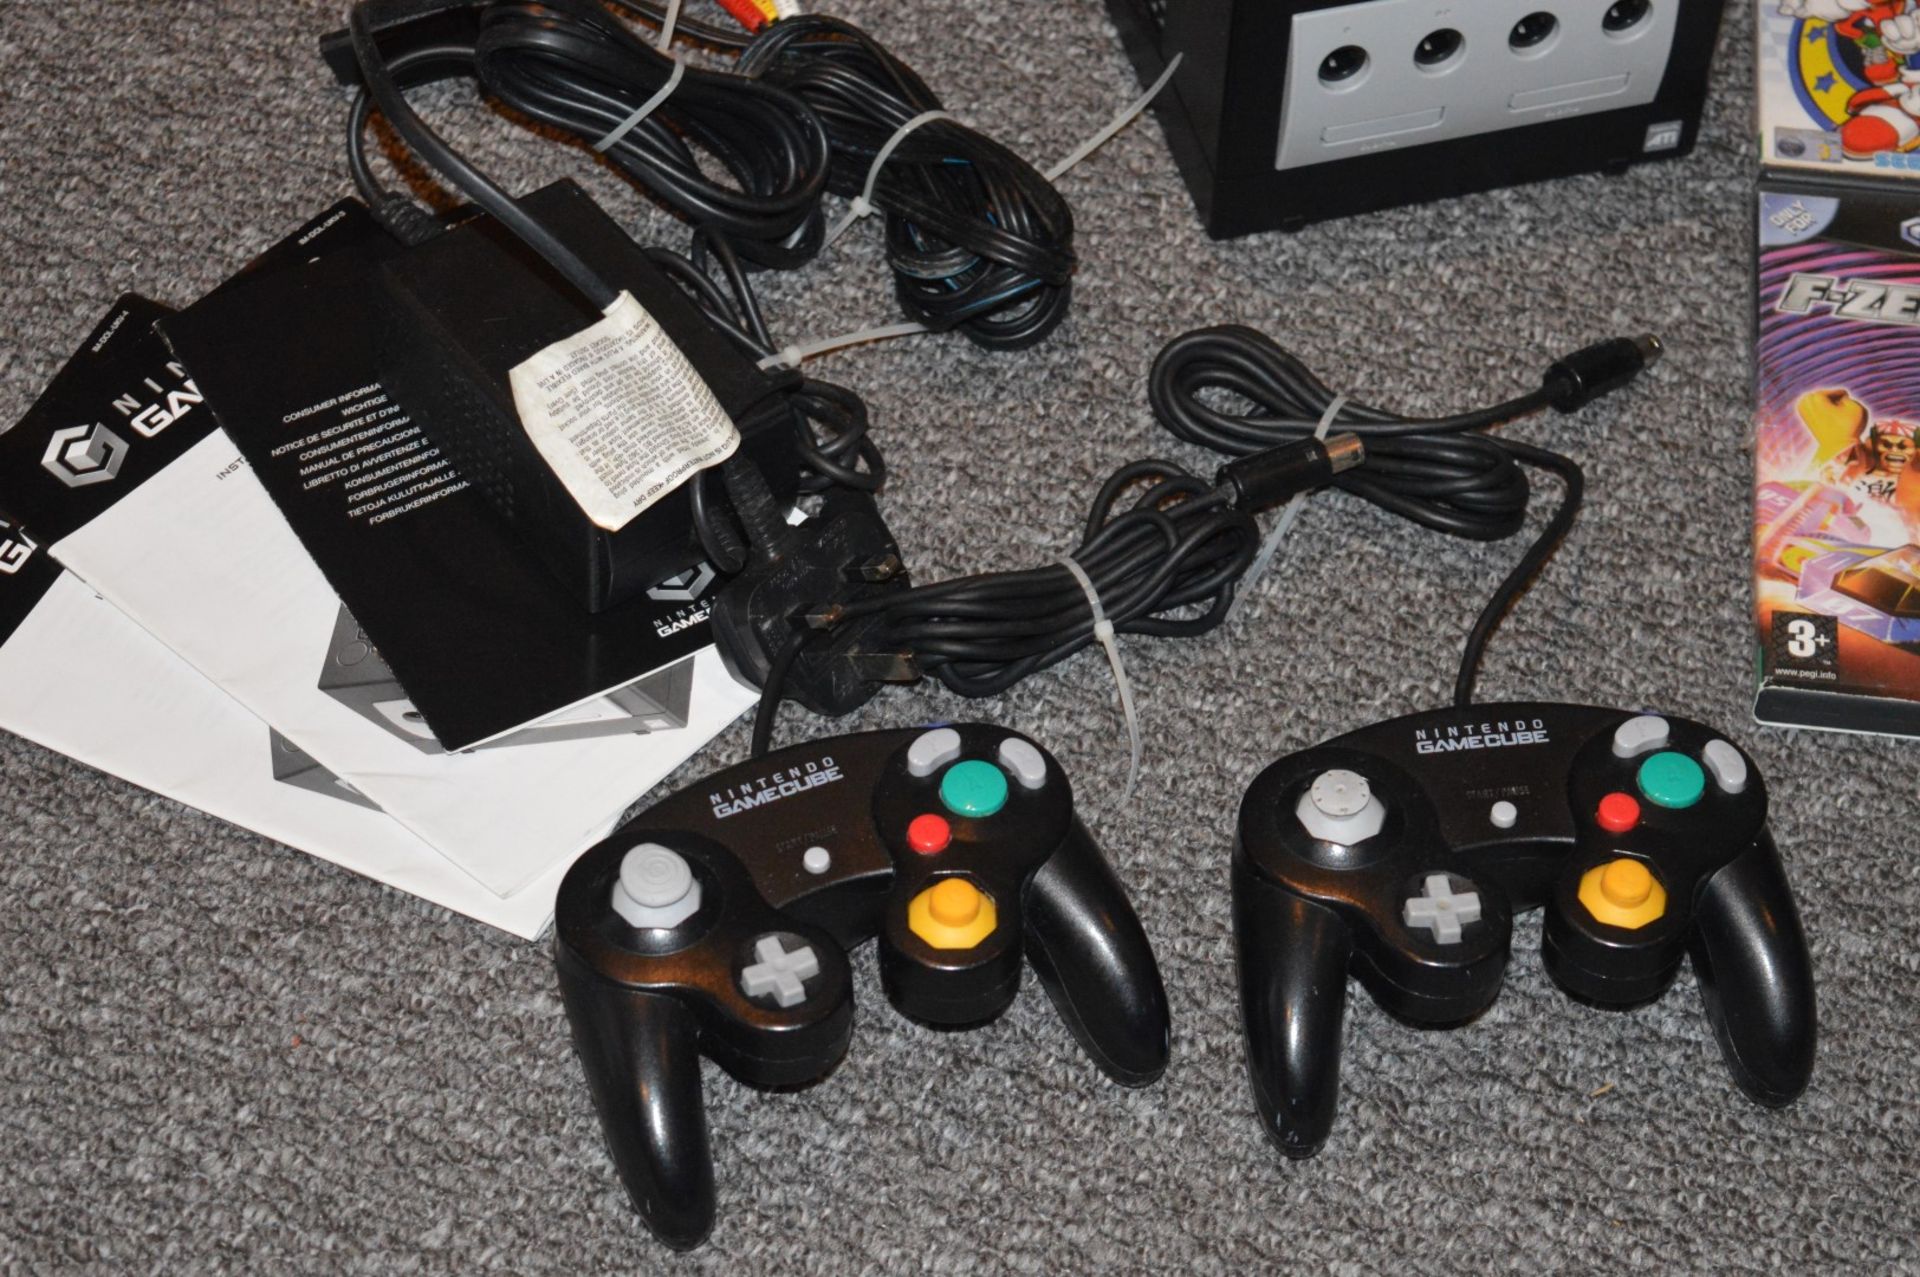 1 x Nintendo Gamecube Games Console With 2 Controllers, Power Adaptor, AV Lead, Instructions and 4 - Image 2 of 4